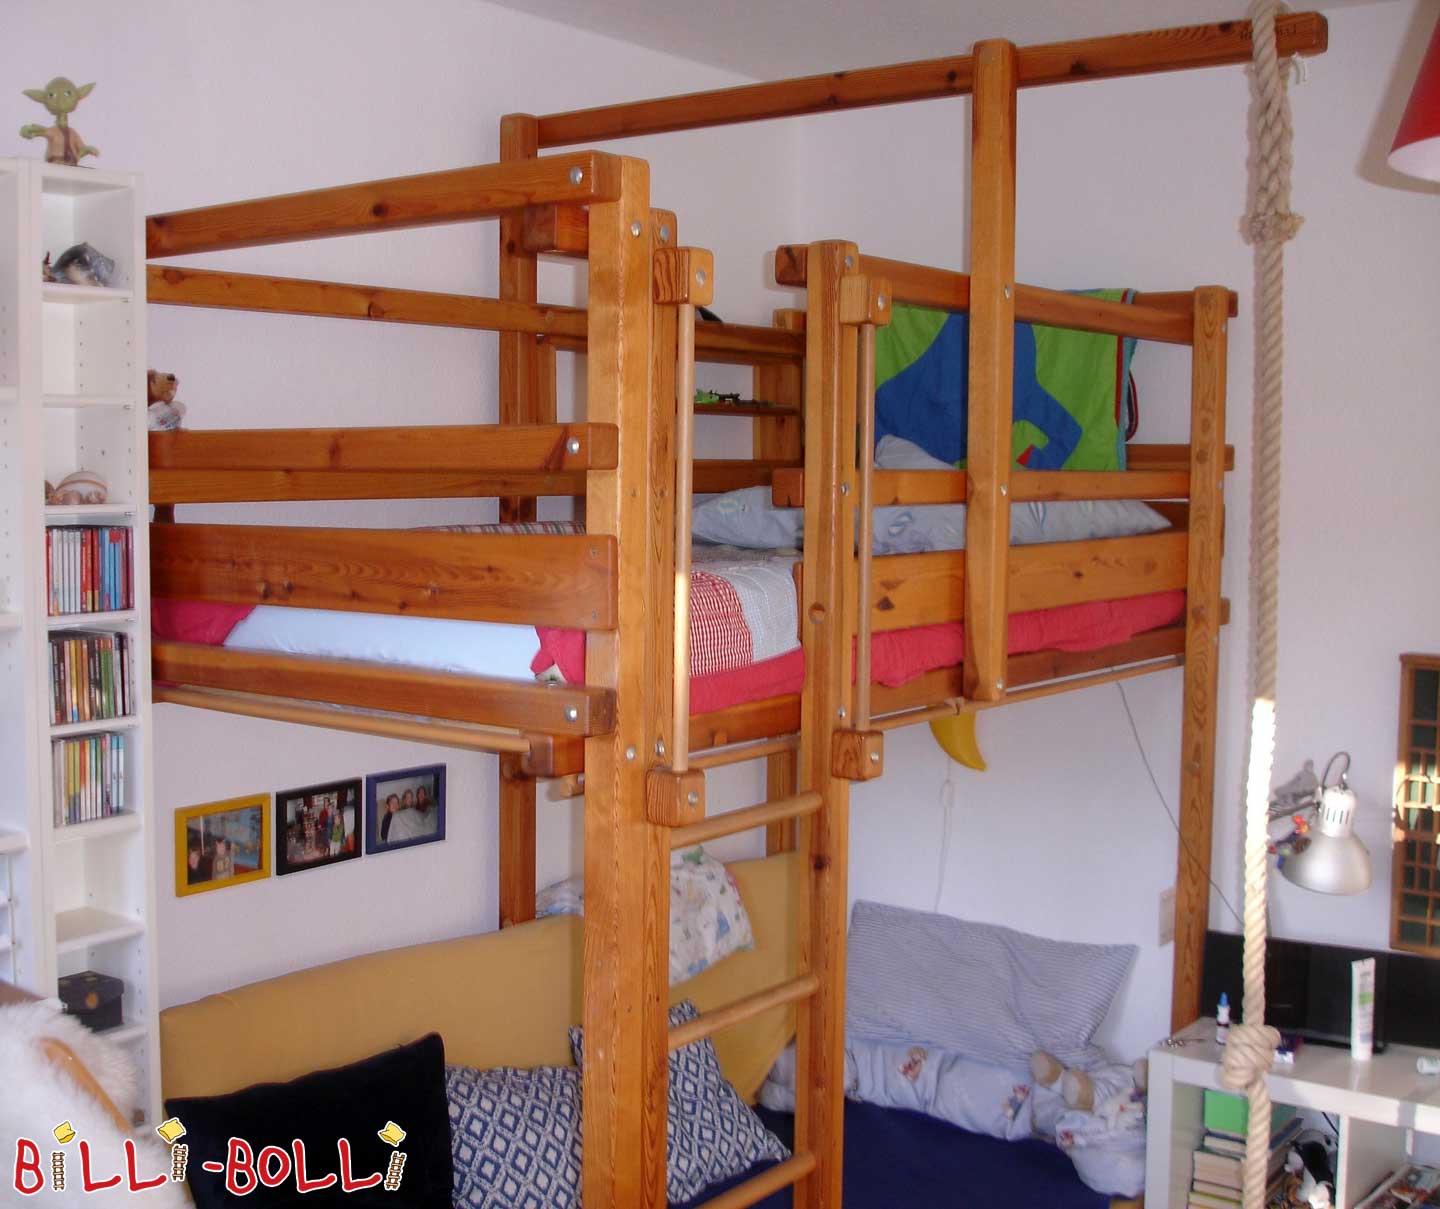 Loft bed growing with the child, 100 x 200 cm, oiled-waxed pine (Category: second hand loft bed)